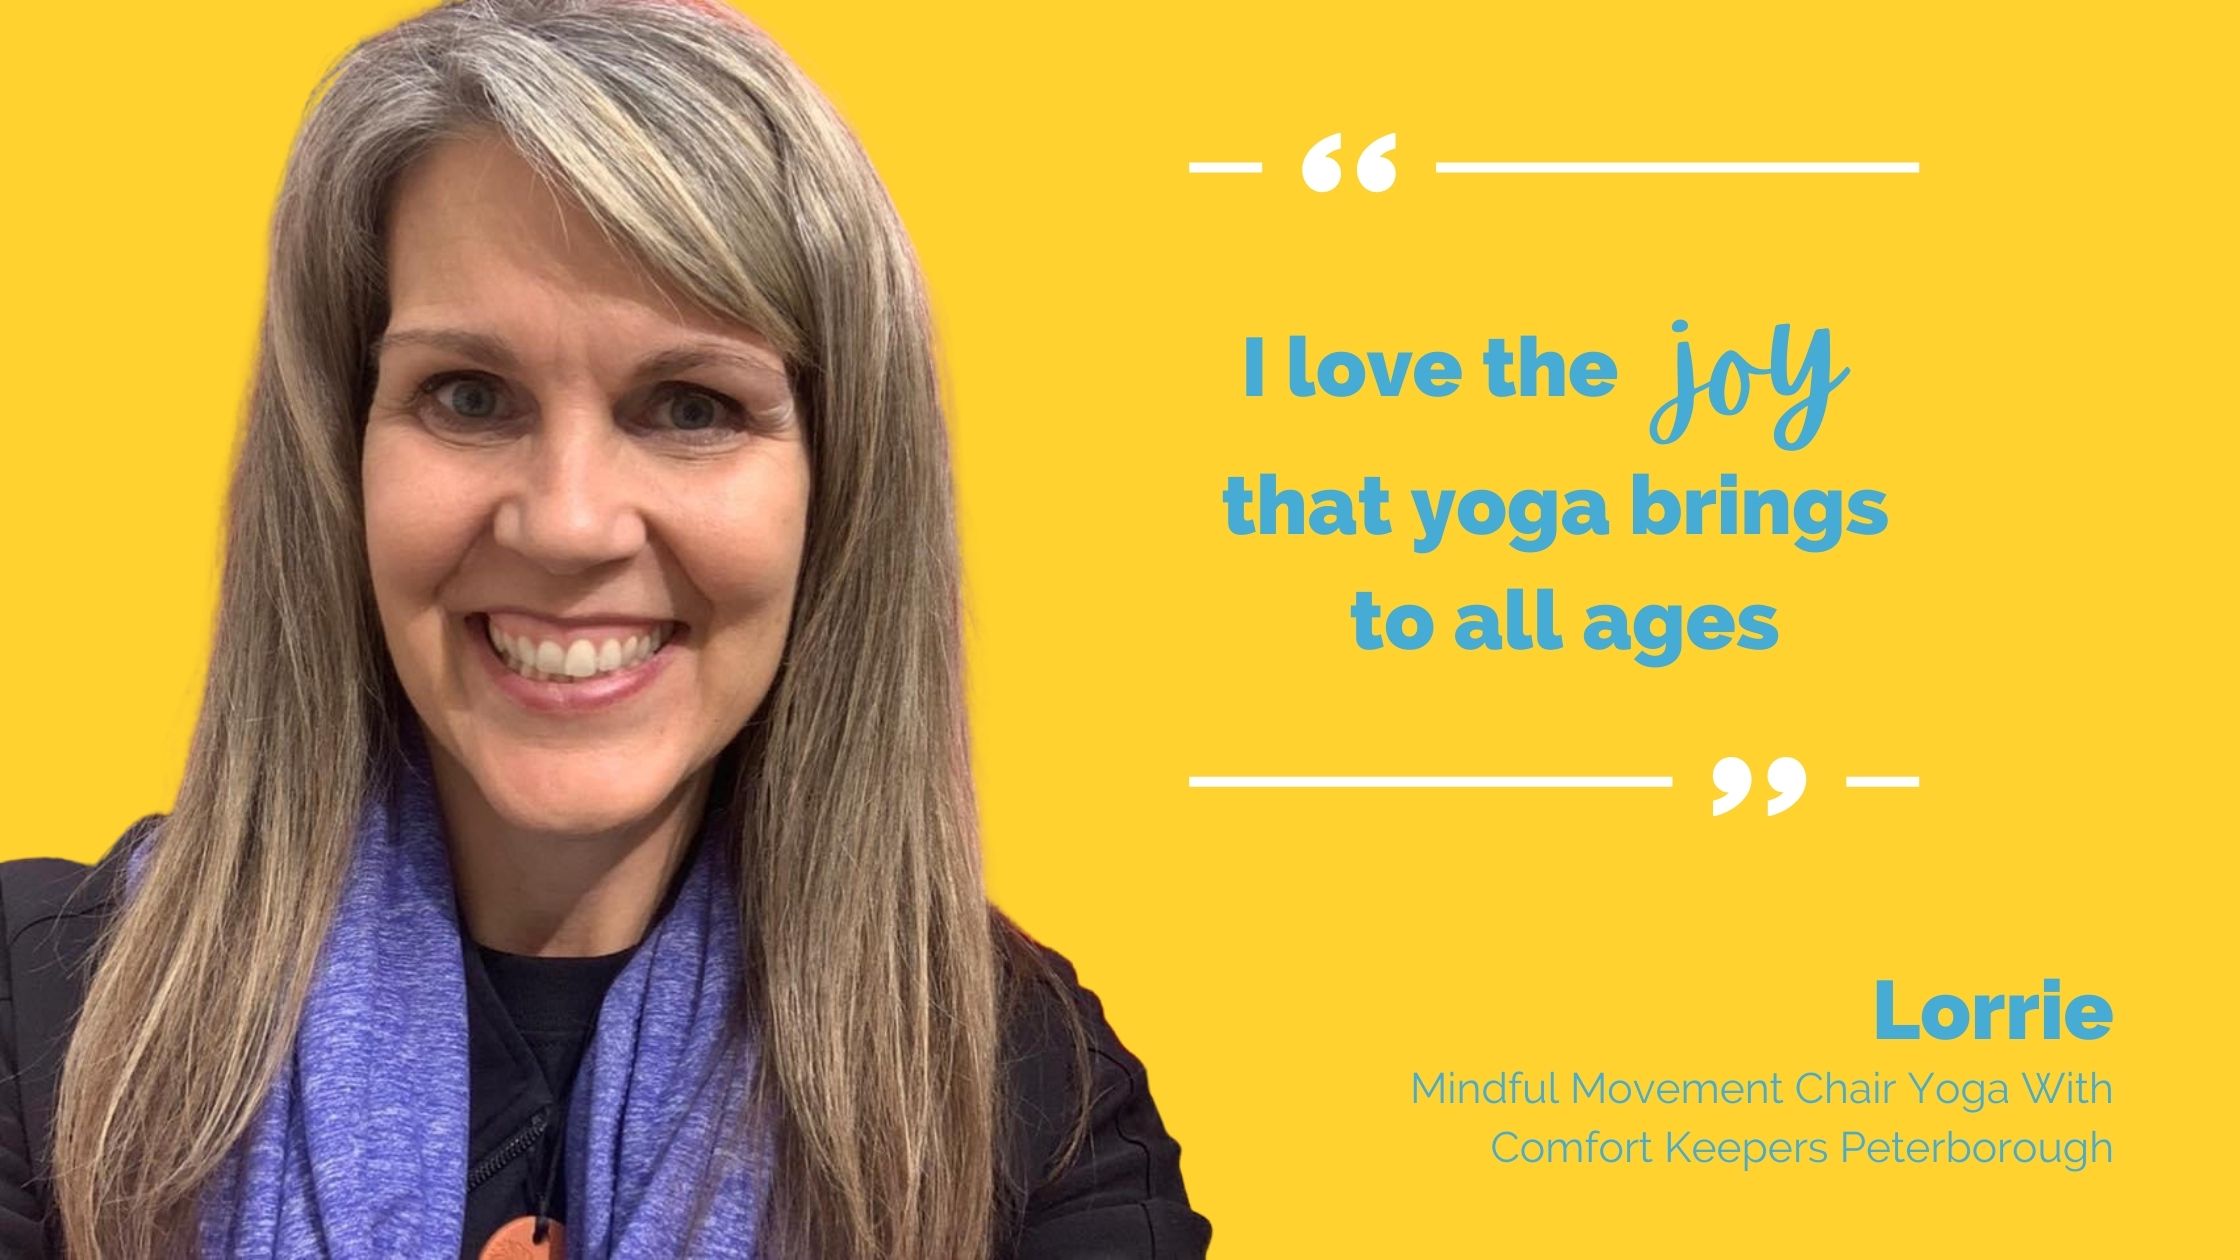 Woman smiling with quote that says "I love the joy that yoga brings to all ages"